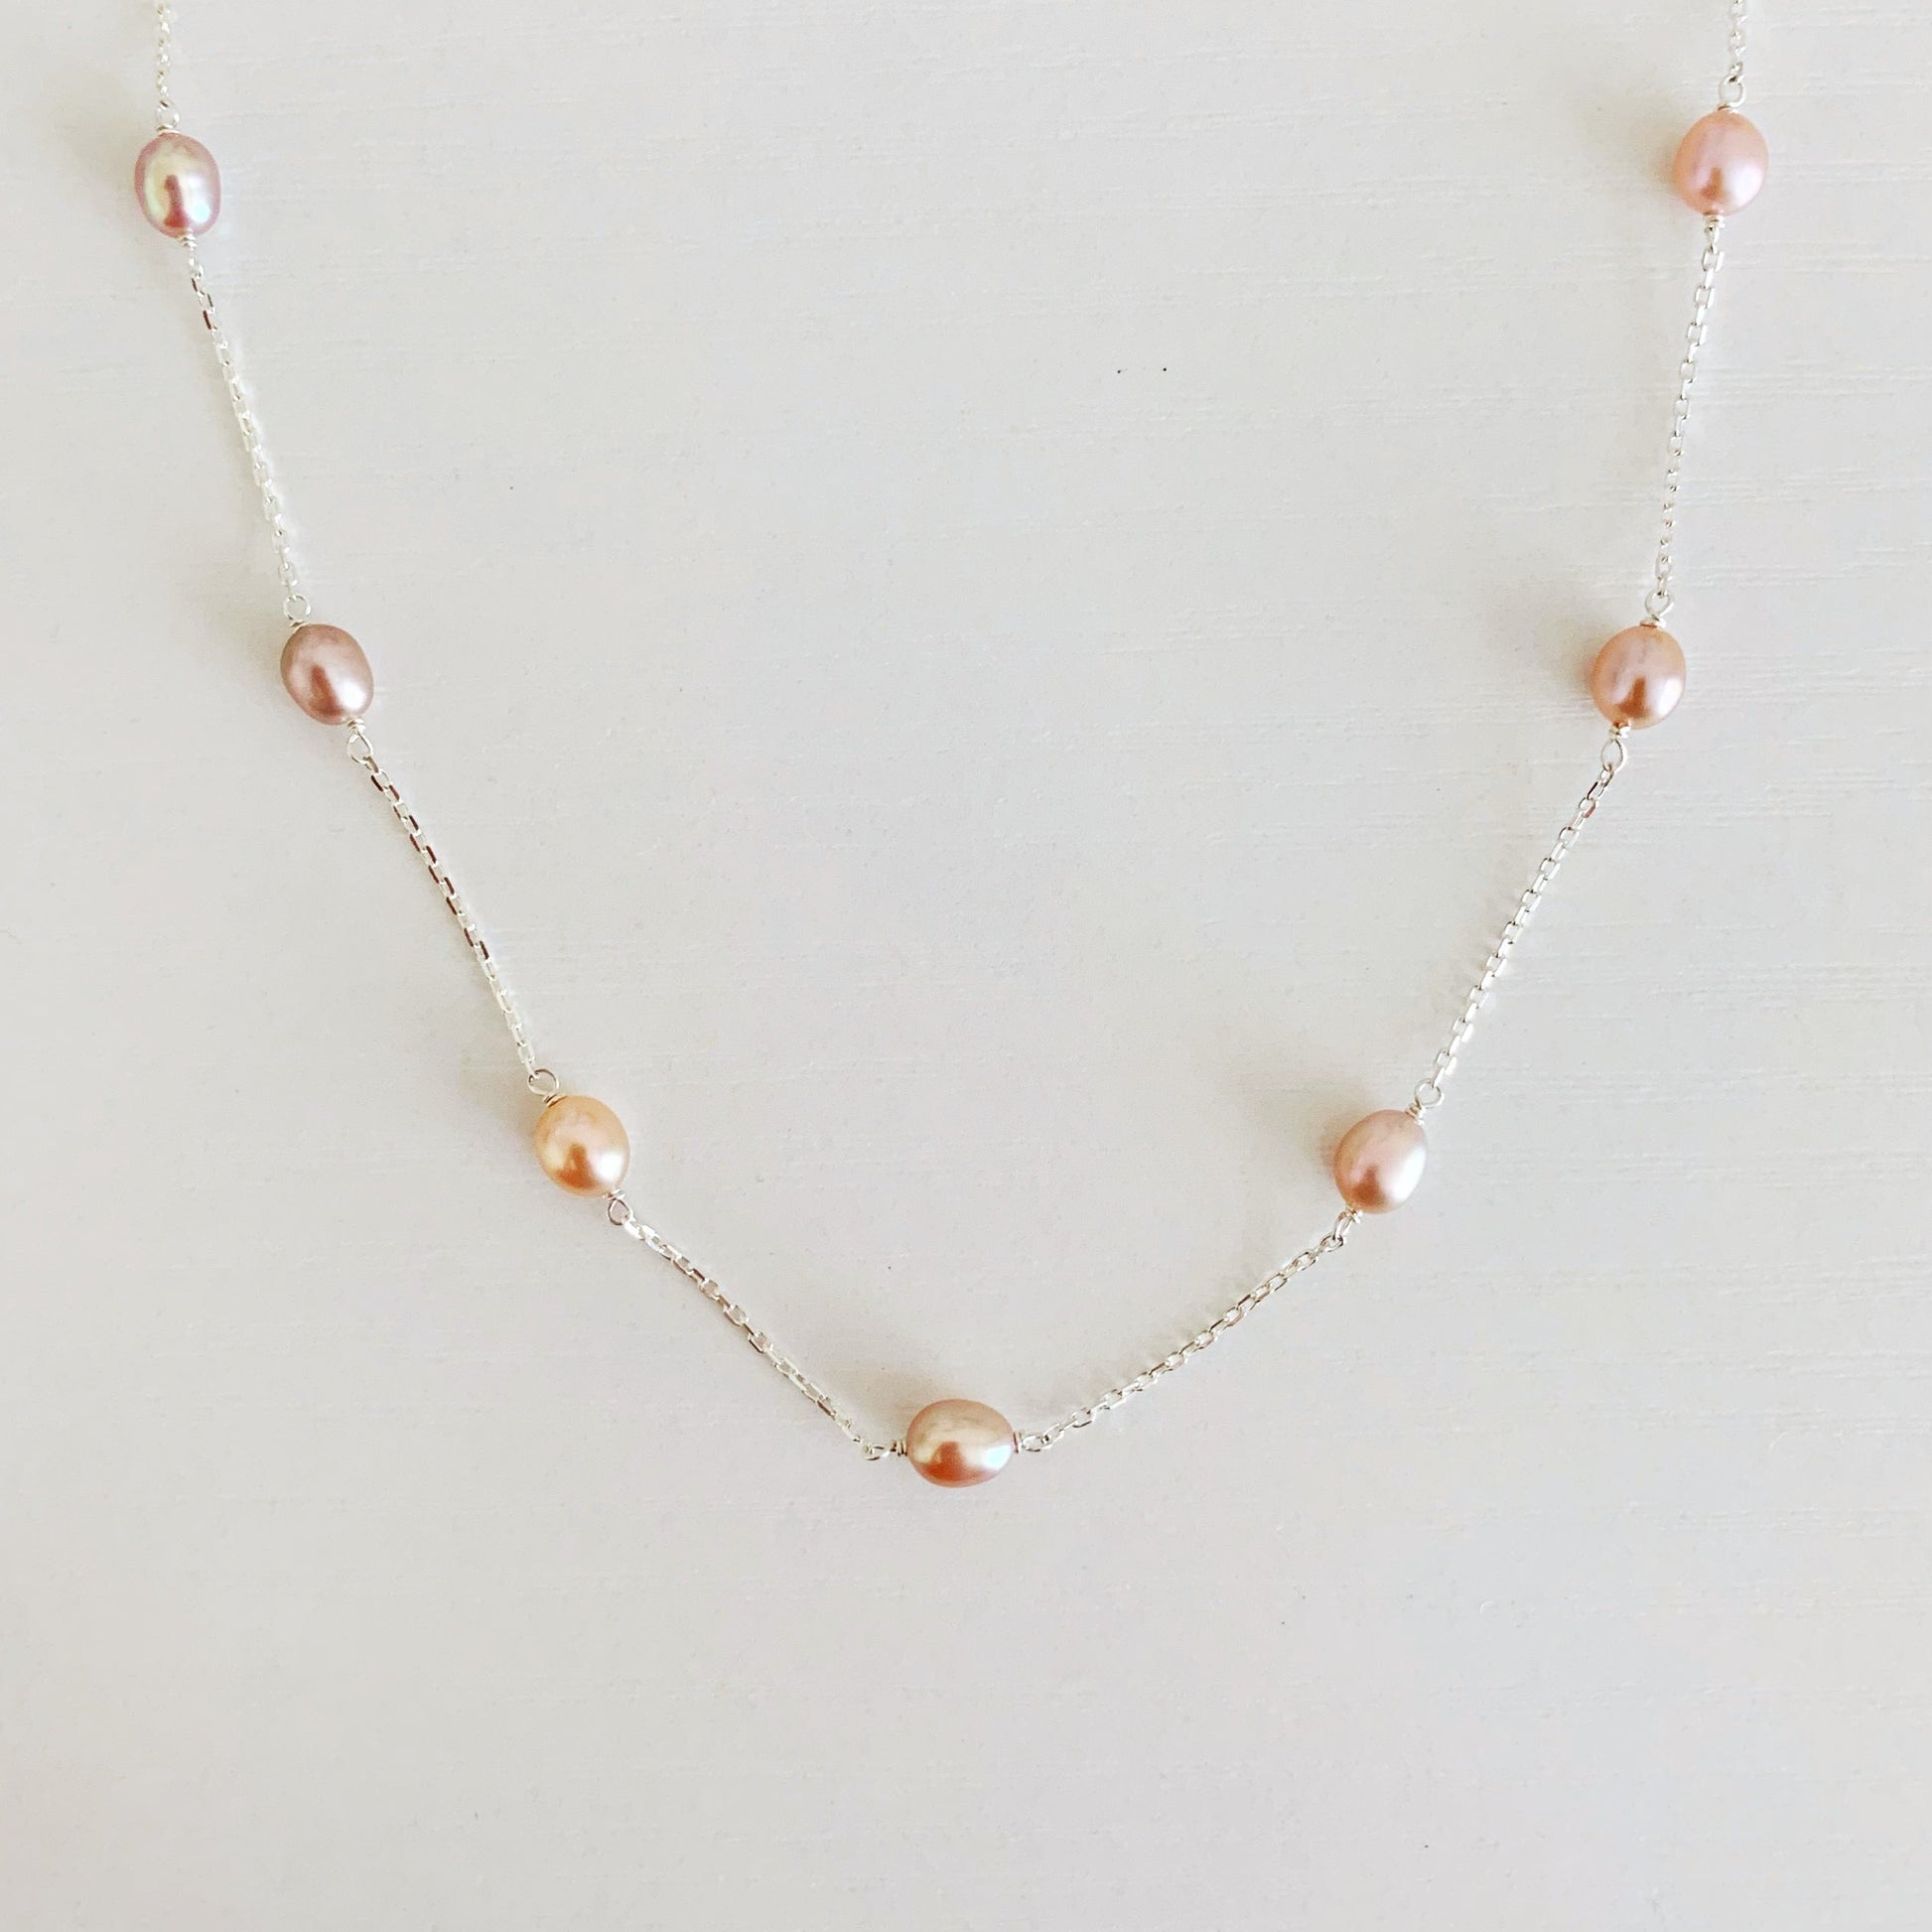 Block Island Necklace by mermaids and madeleines features pink natural color freshwater oval pearls in stations on sterling silver chain. this is a photo of just the front half of the necklace on a white surface